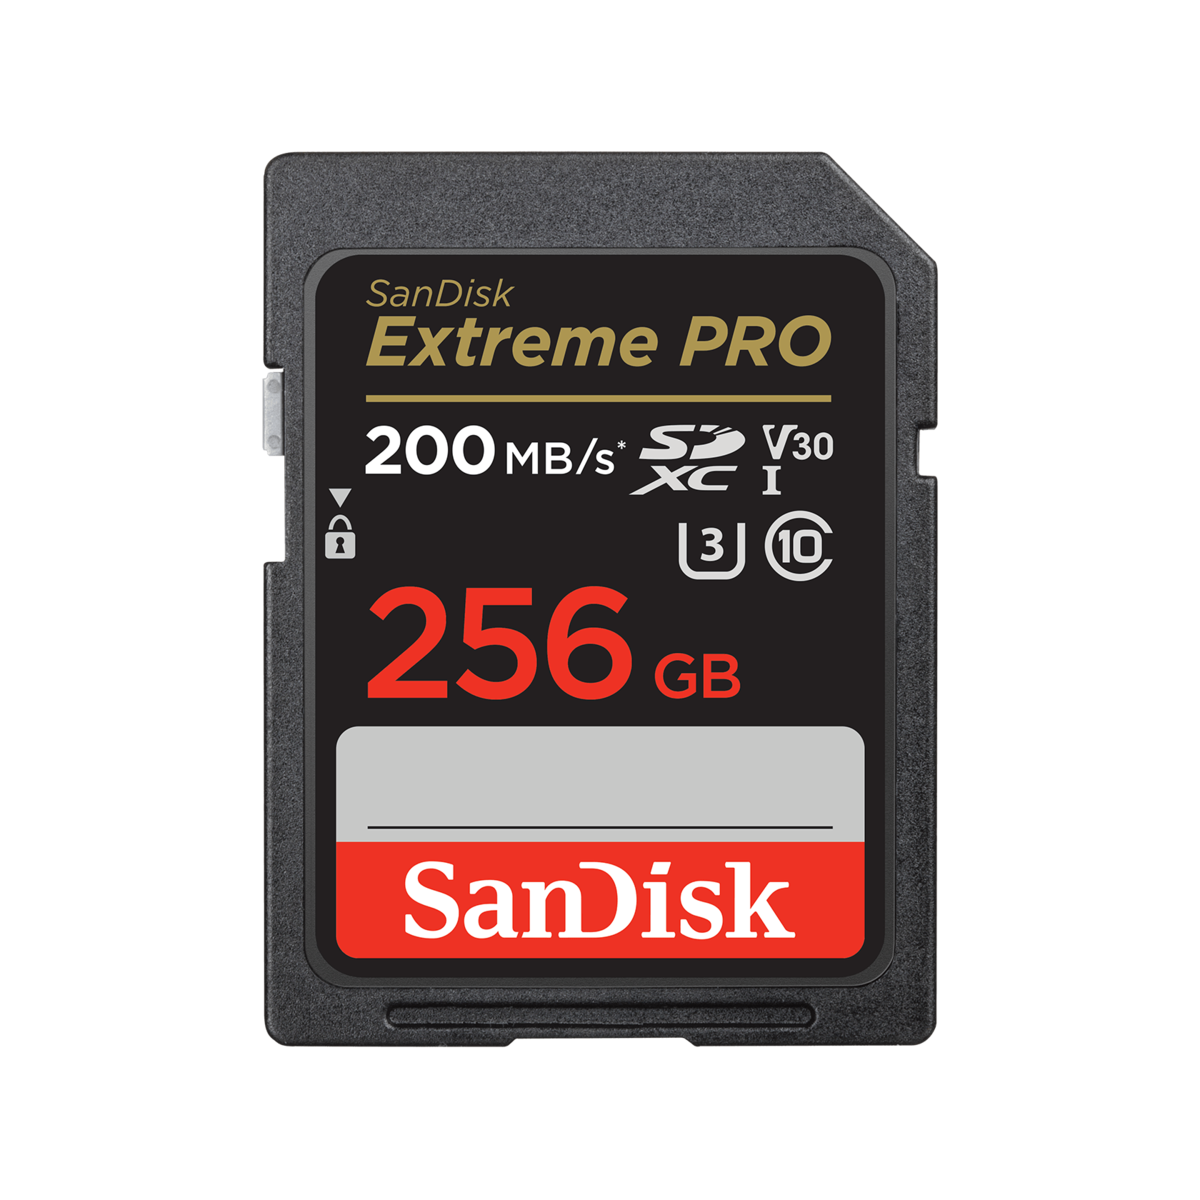 SanDisk 256GB Extreme Pro SDXC UHS-I/U3 V30 Class 10 Memory Card, Speed Up  to 200MB/s (SDSDXXD-256G-GN4IN)